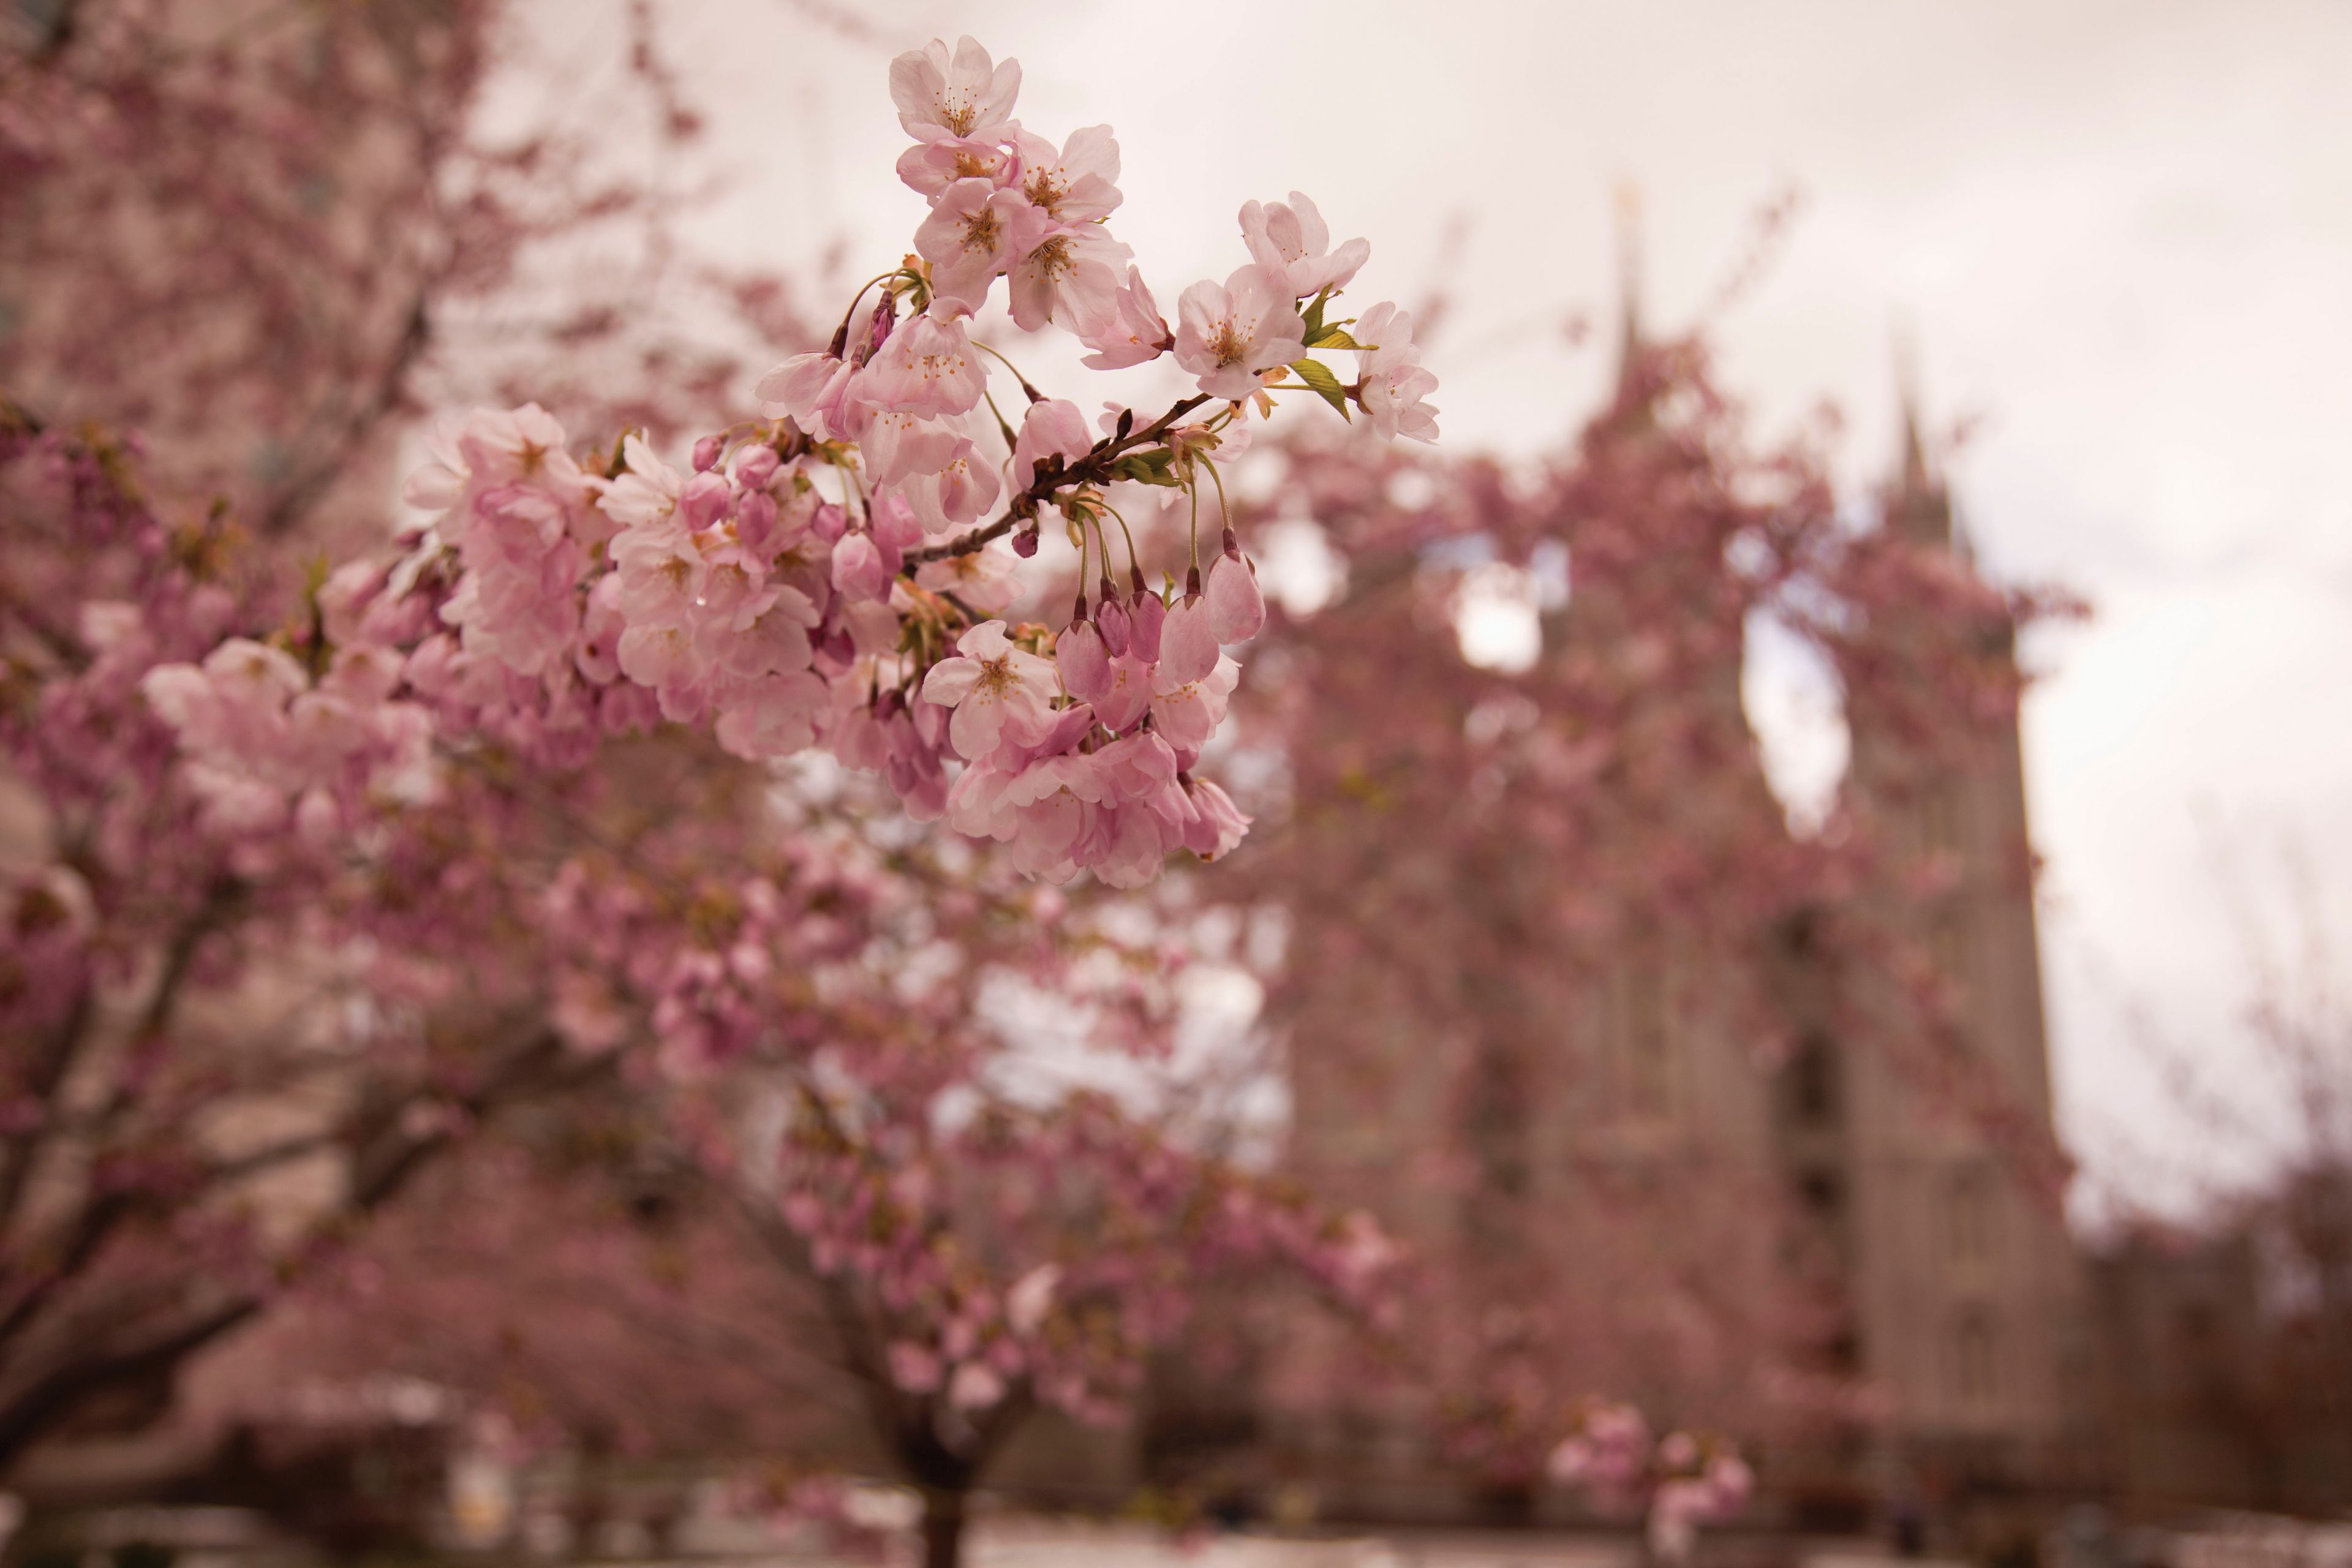 Tree blossoms during spring in front of the blurred Salt Lake Temple.